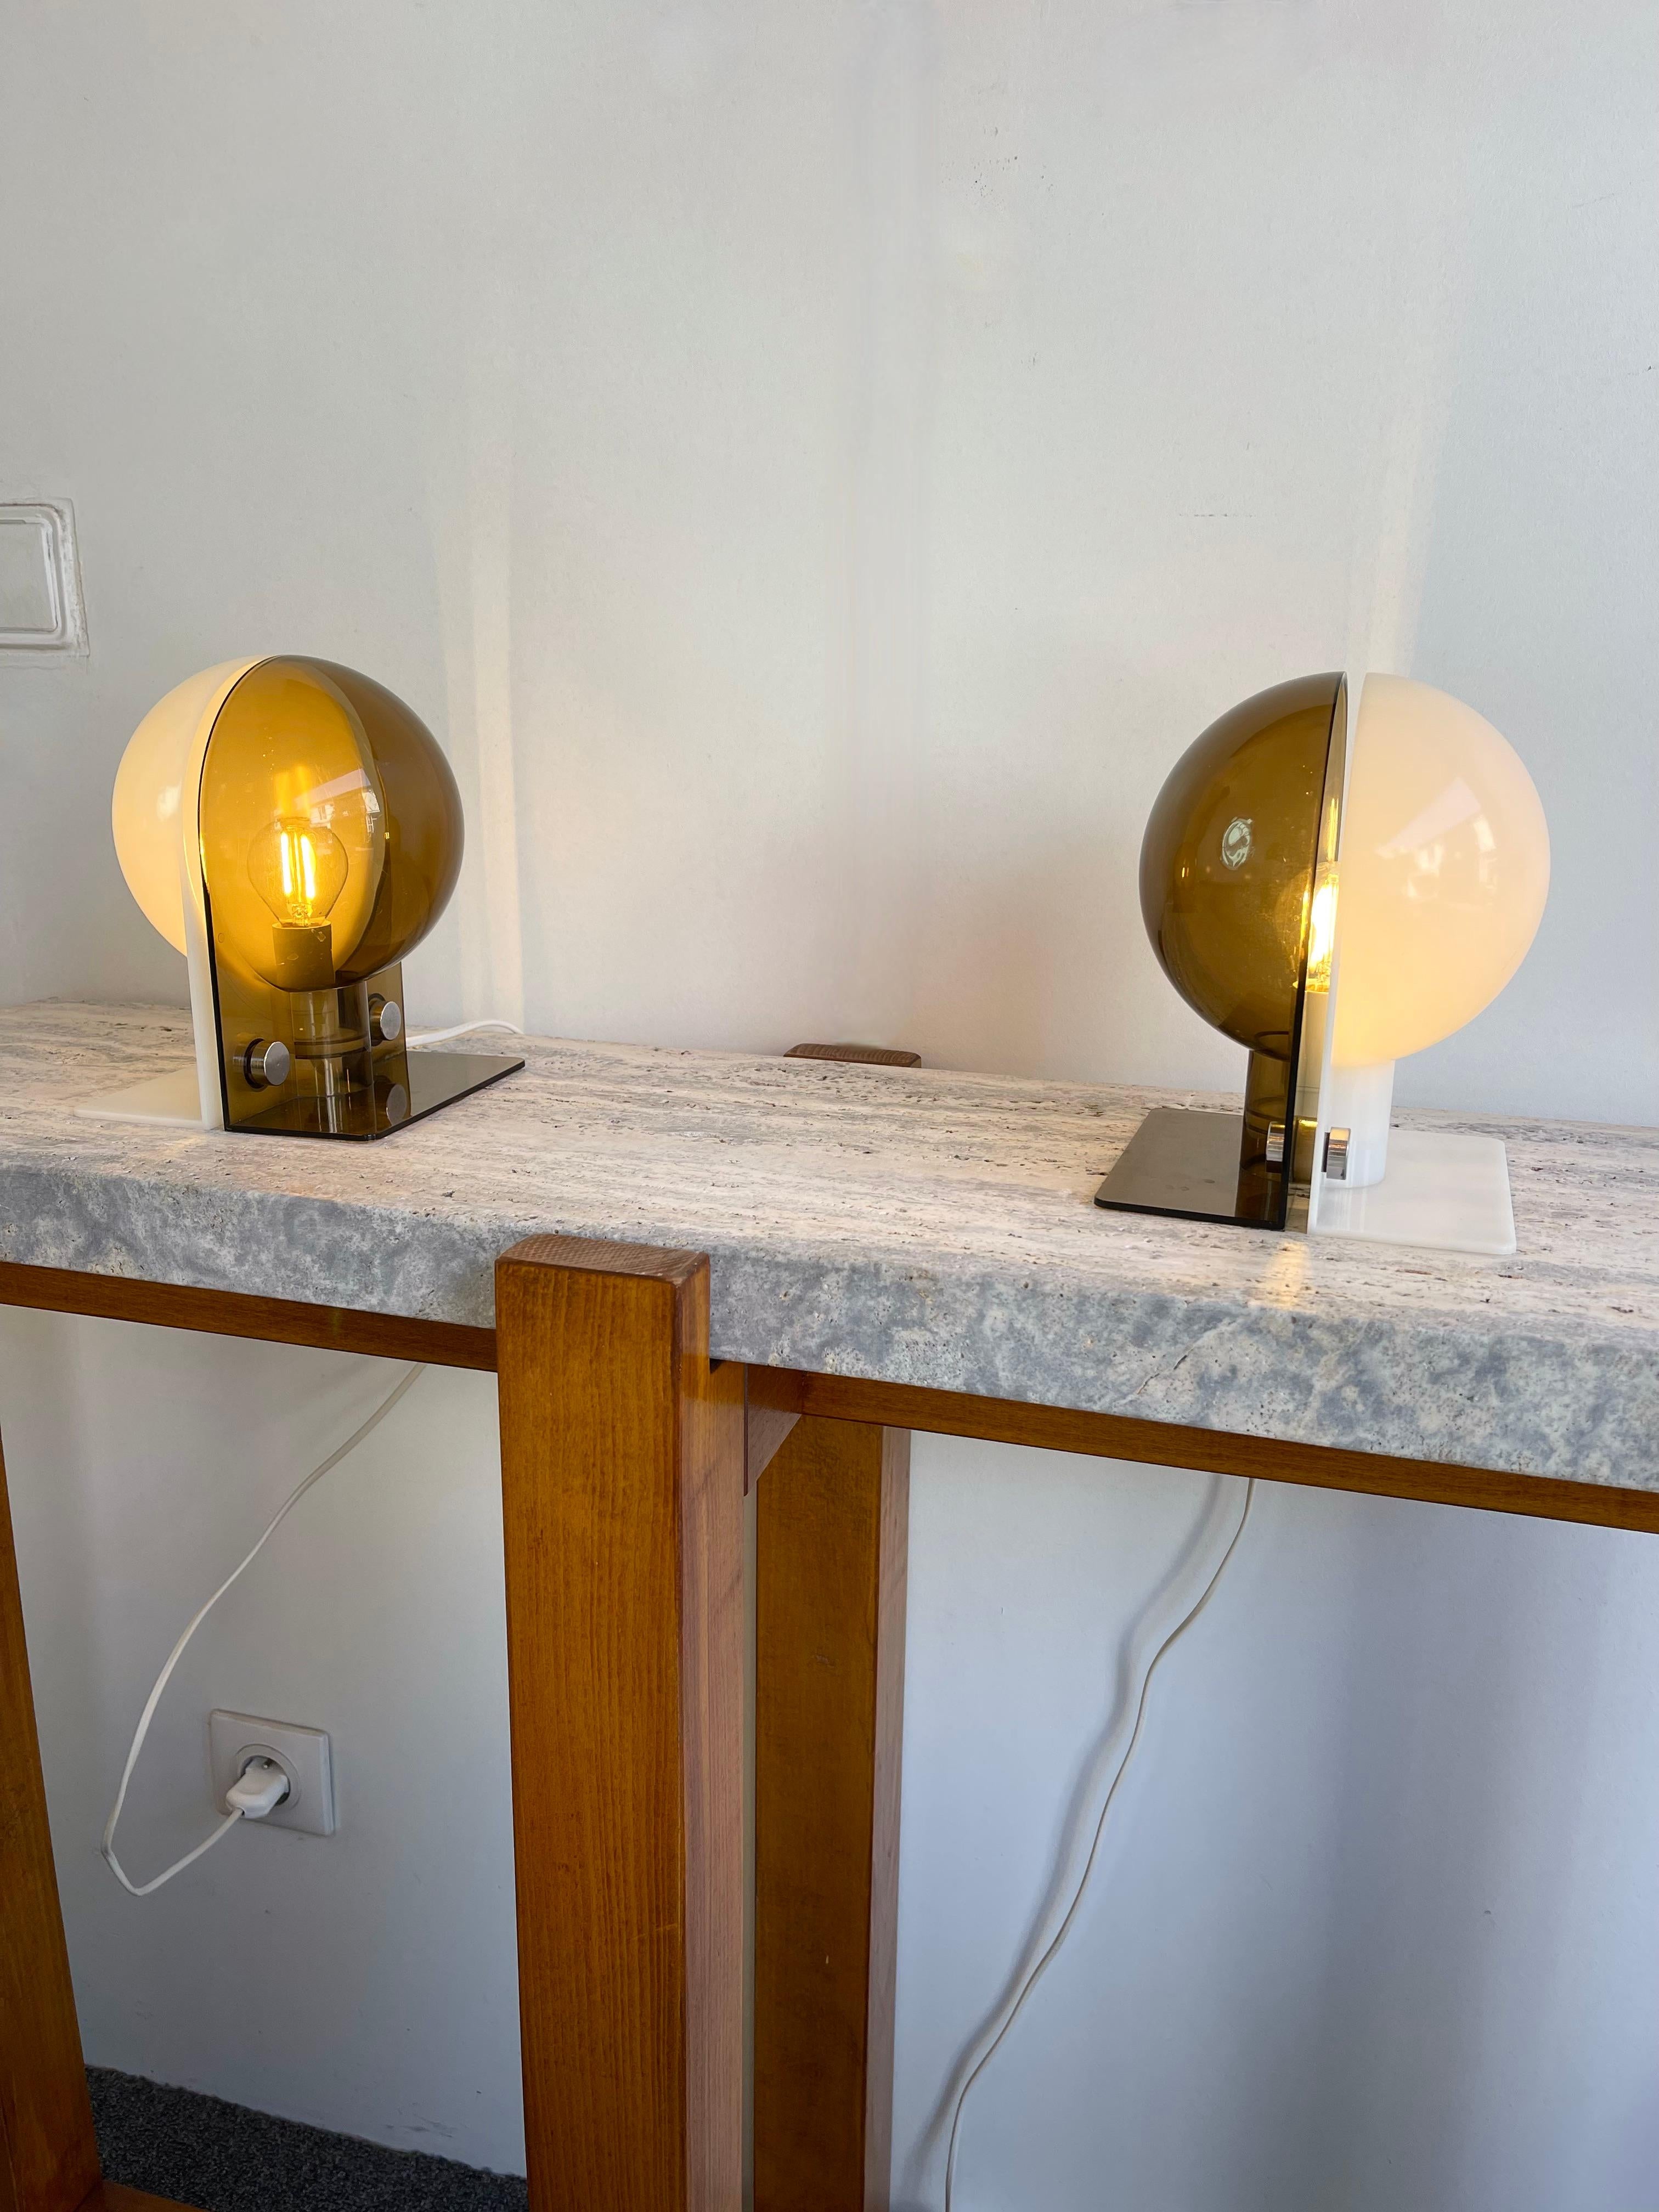 Pair of Lucite Lamps Sirio by Brazzoni Lampa for Harvey Guzzini. Italy, 1970s For Sale 6